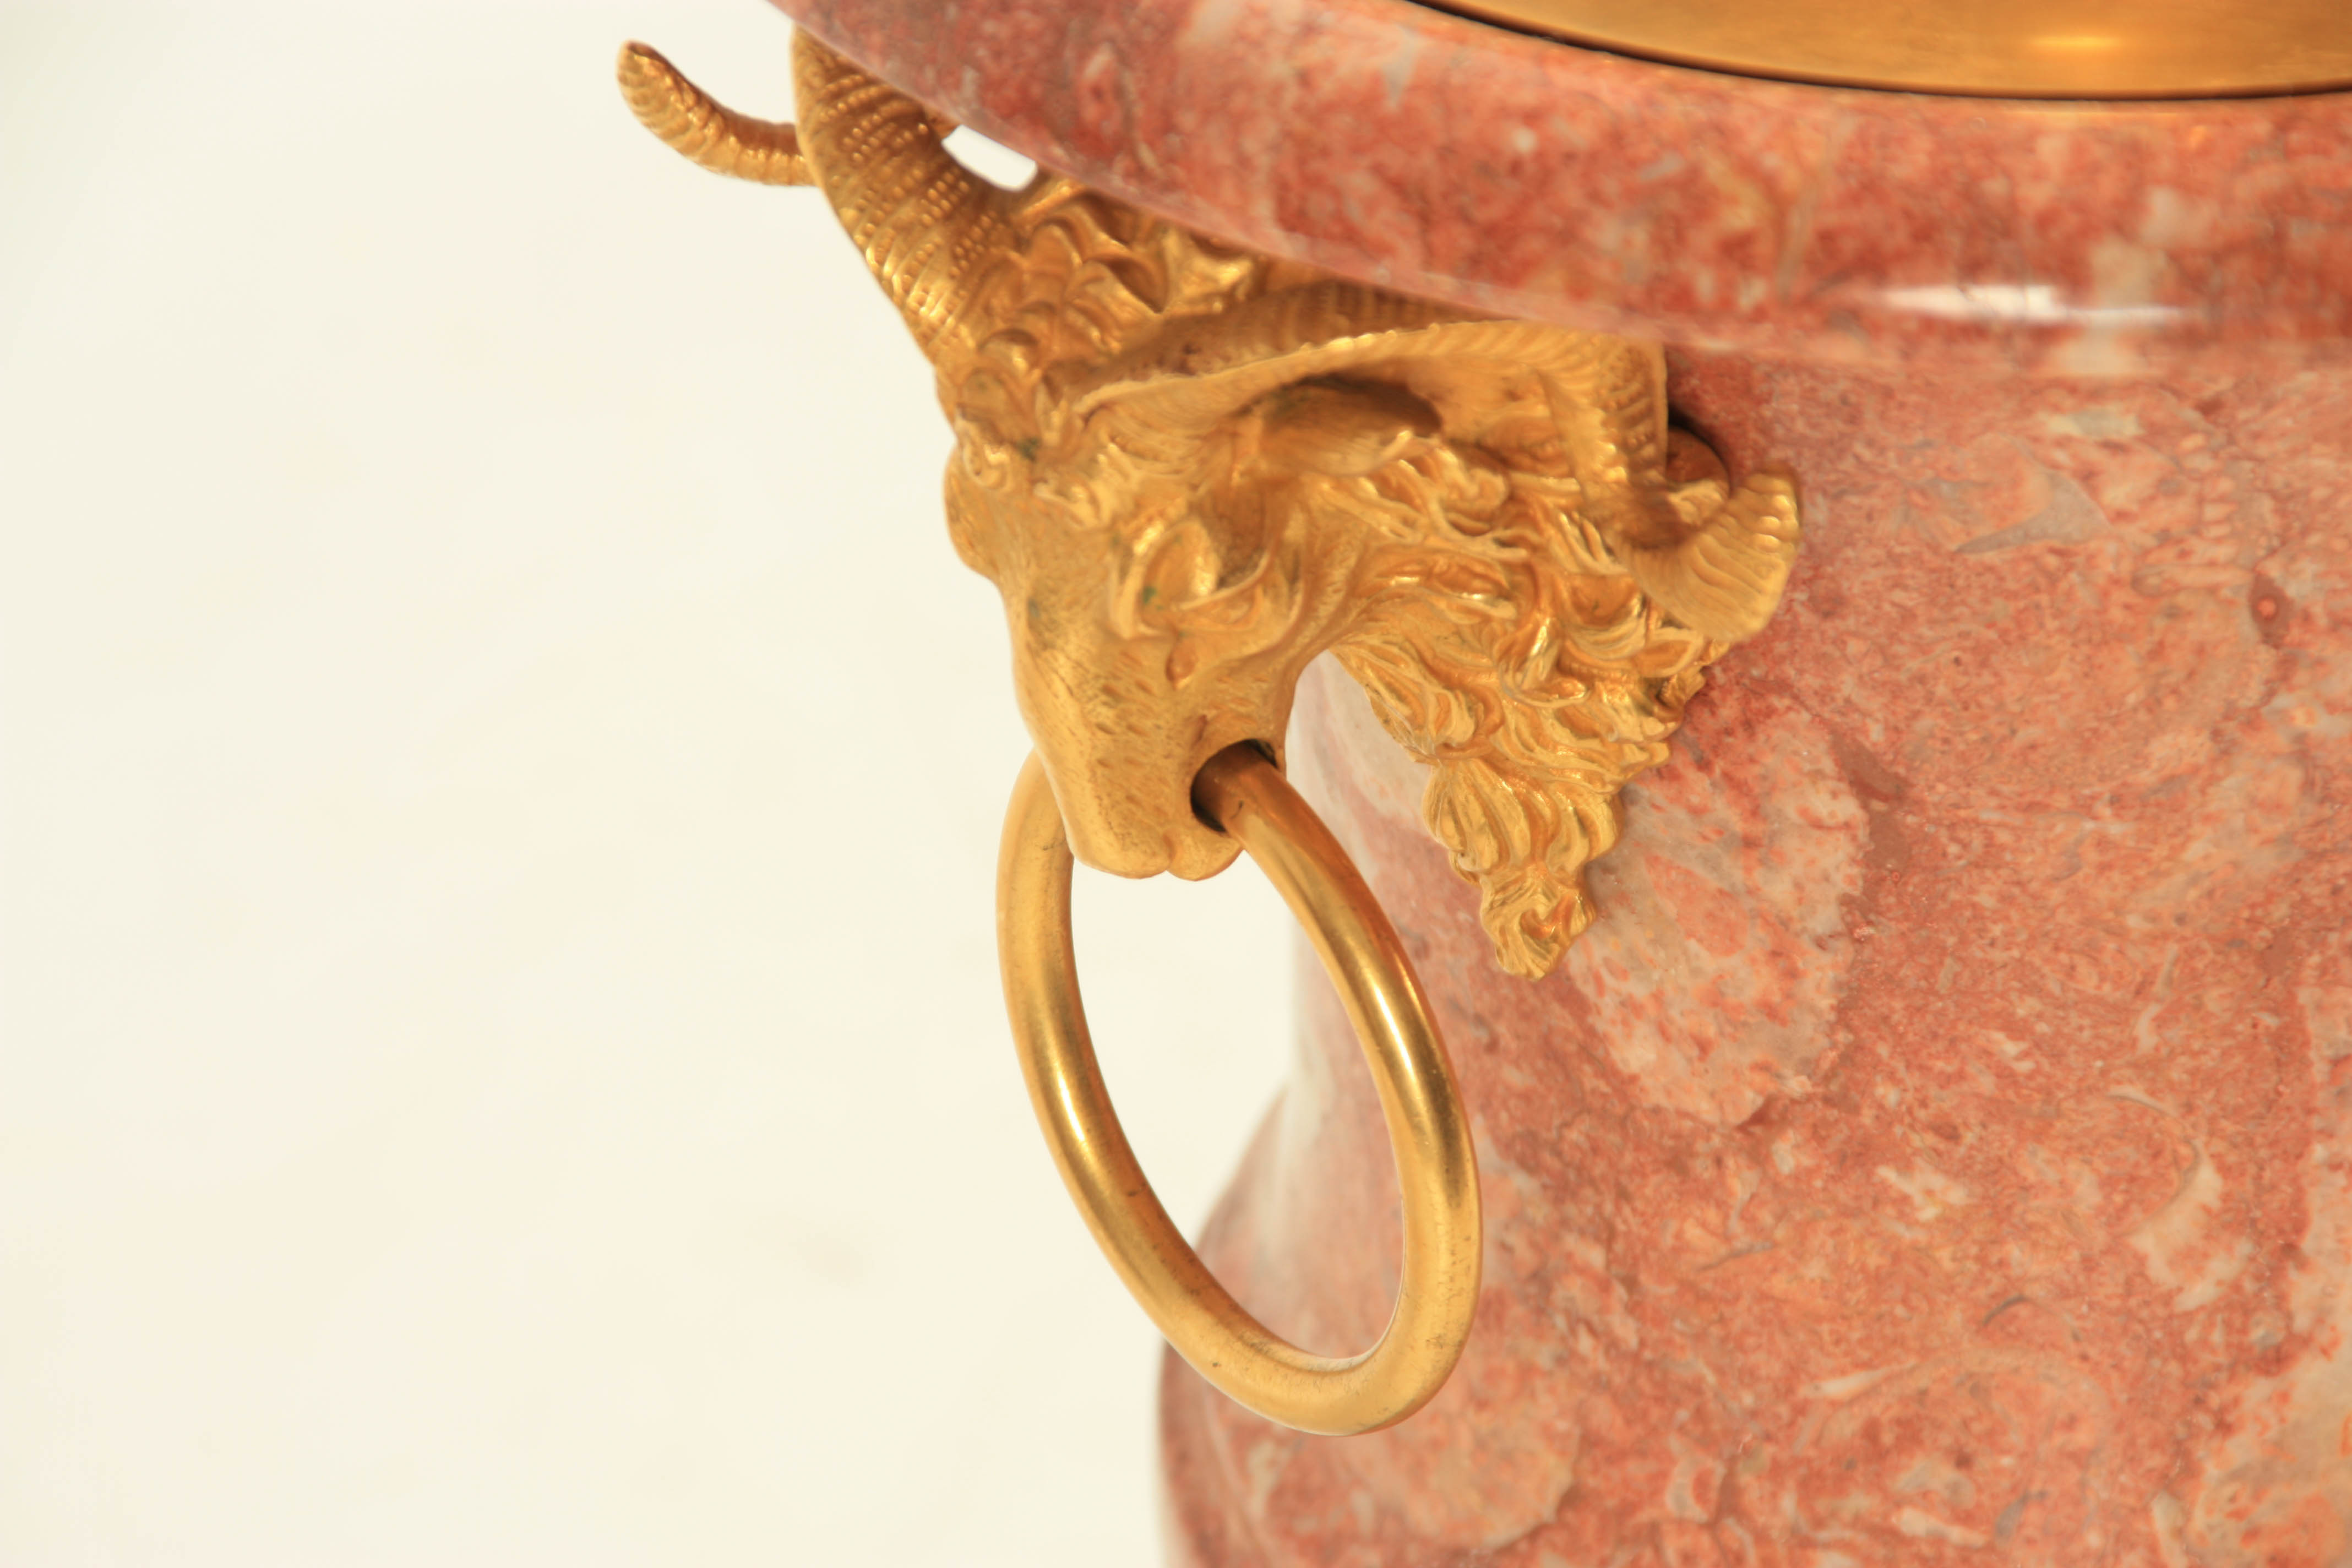 A 20TH CENTURY FRENCH MARBLE AND GILT BRASS TABLE LAMP with urn-shaped body and rams head side - Image 6 of 6